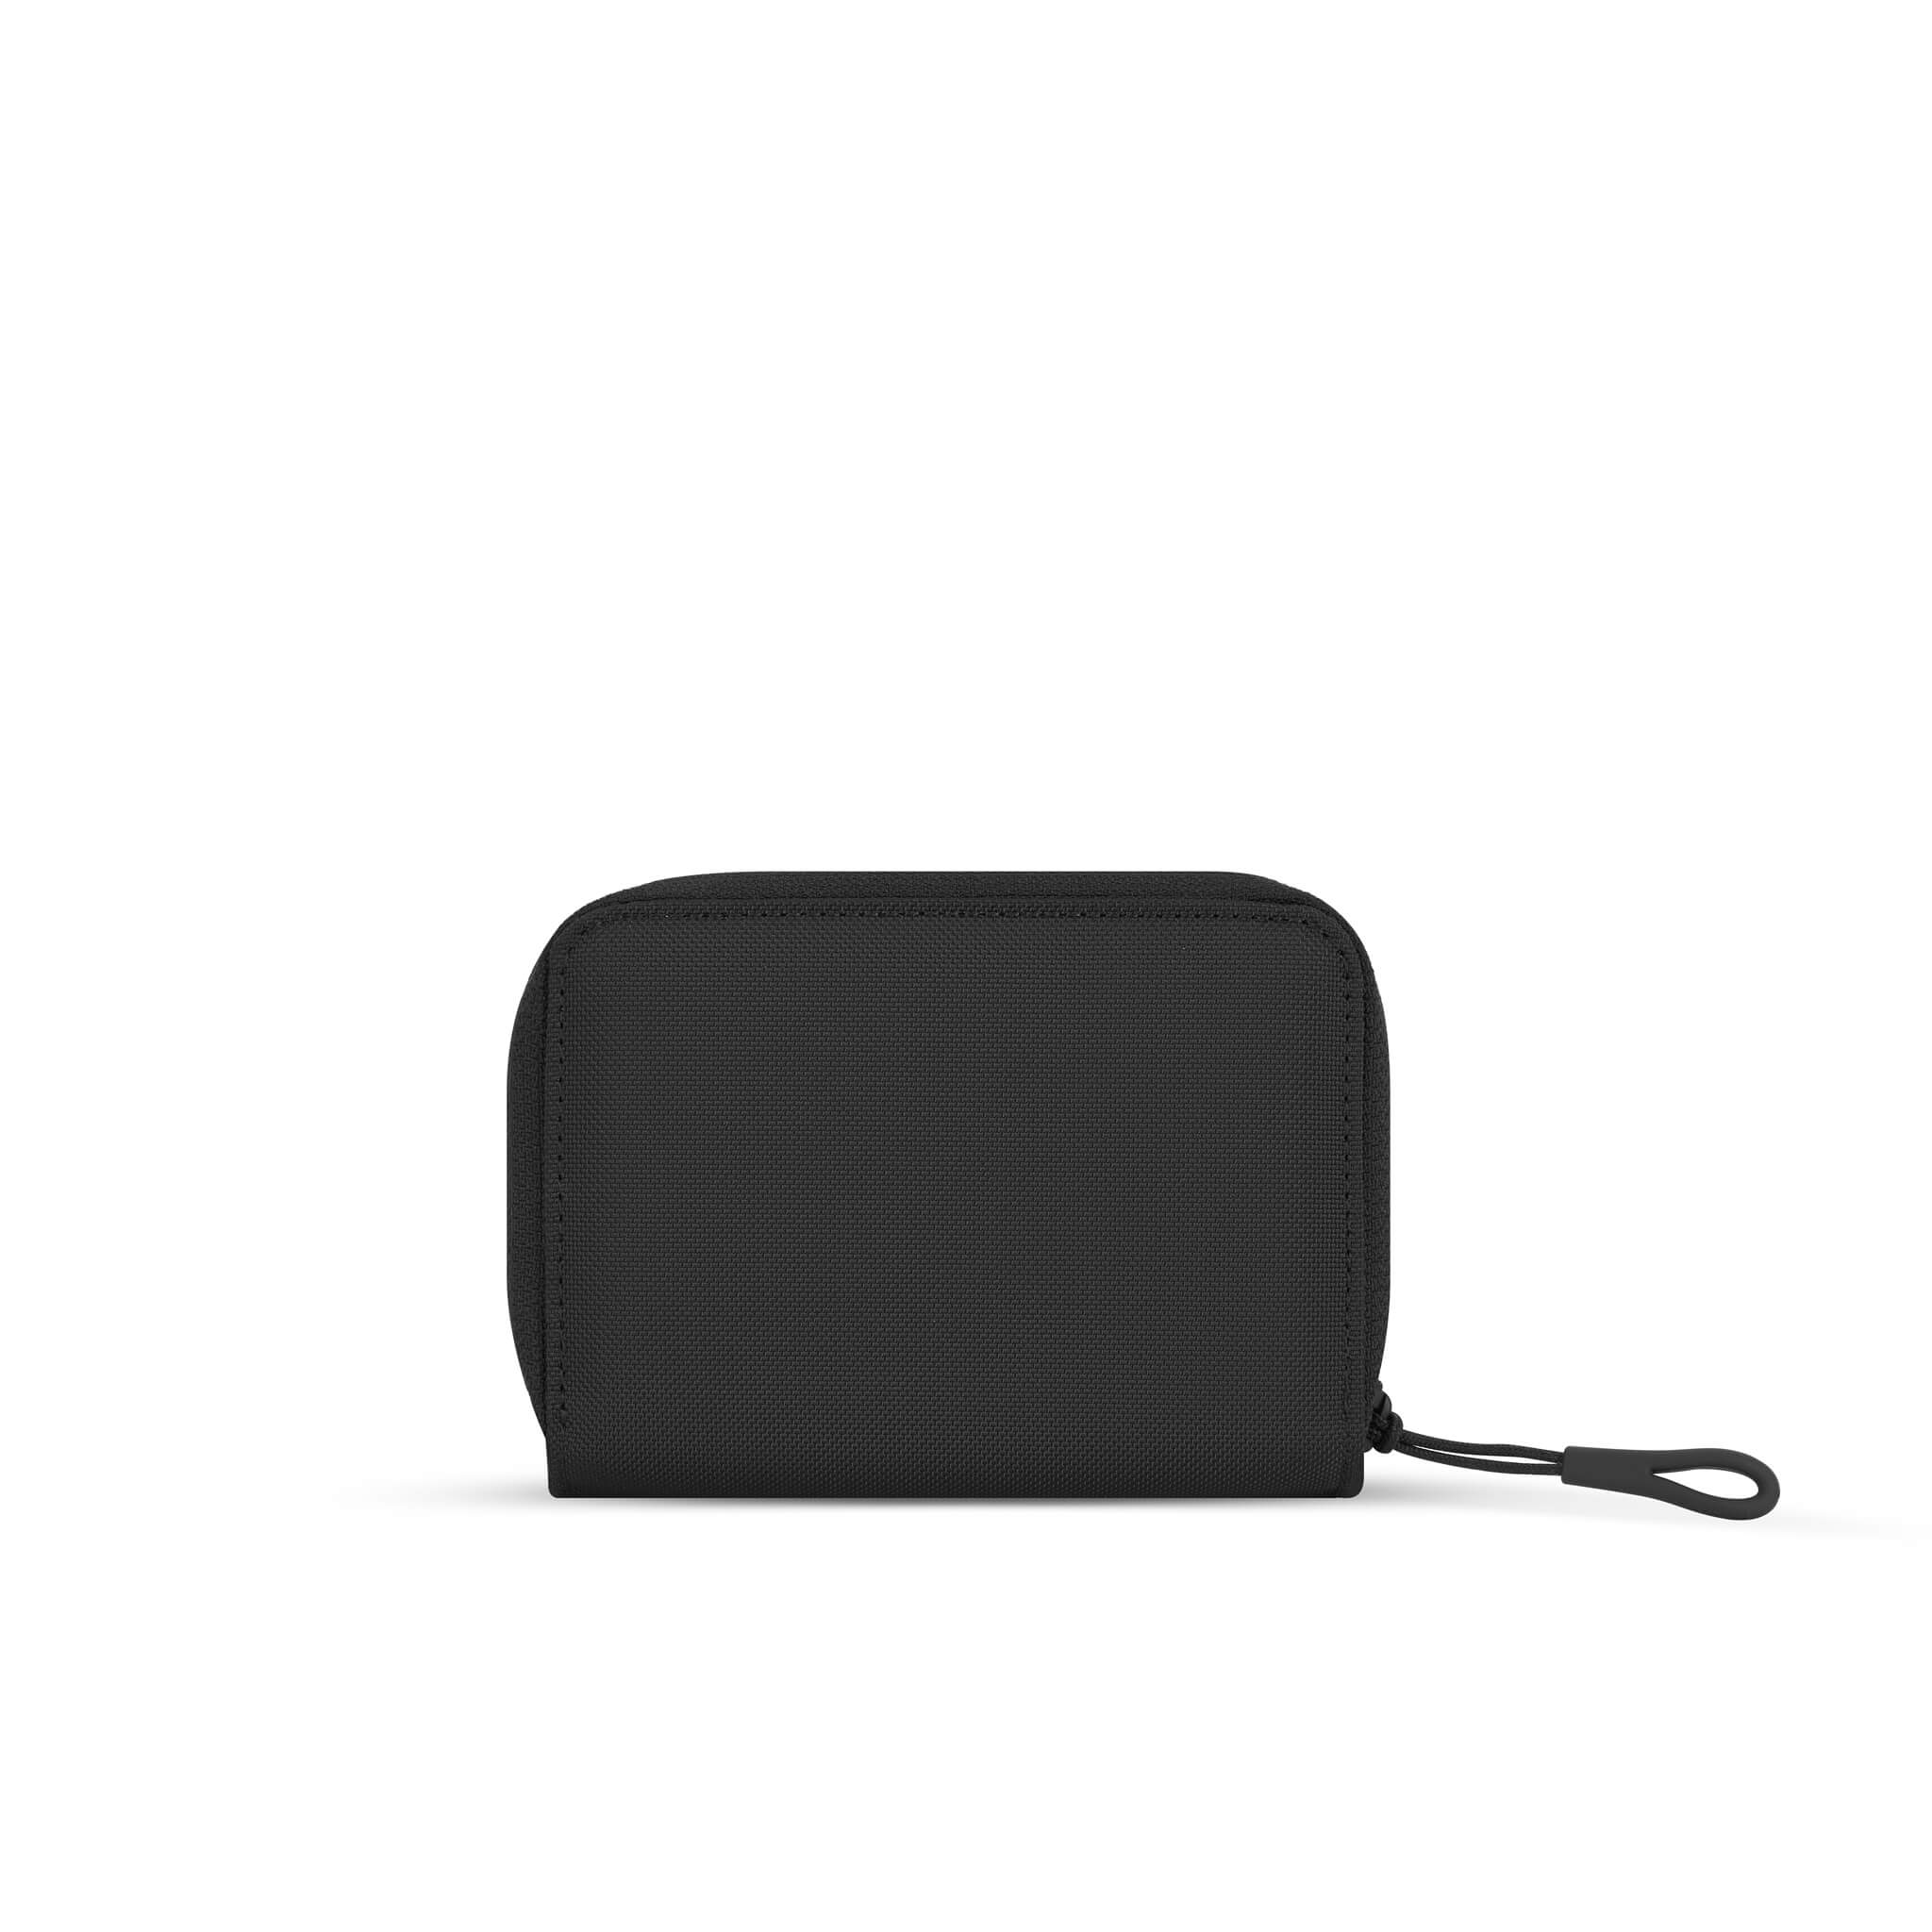 Back view of Sherpani wallet, the Barcelona in Raven. An easy-pull zipper sits on the right side, accented in black.